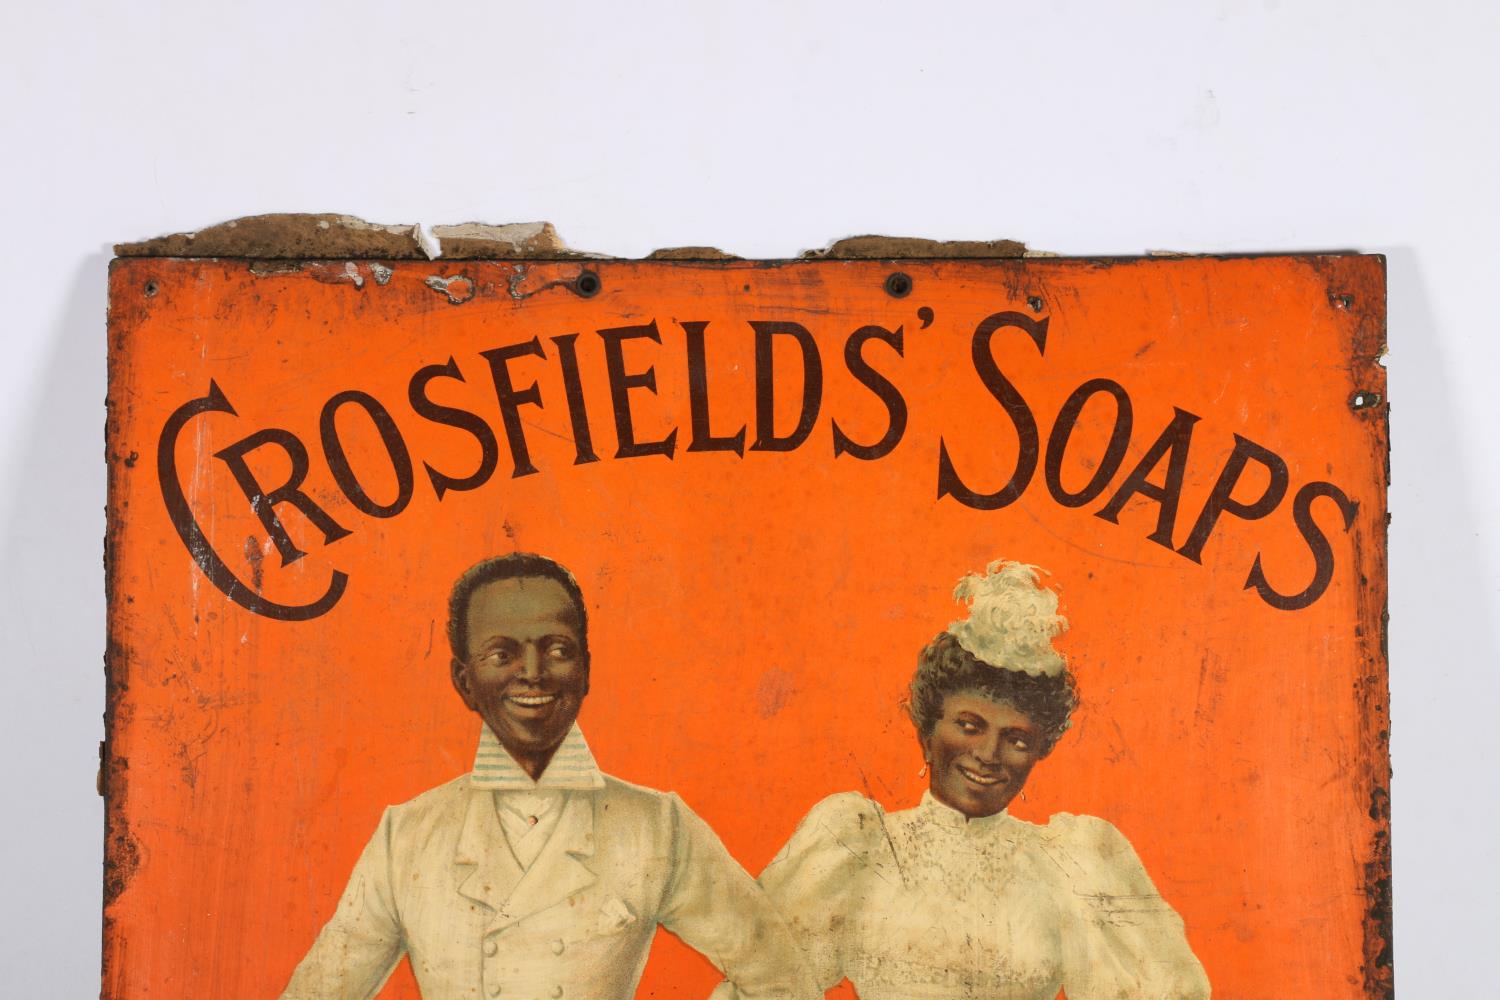 Vintage advertisement sign for Crosfields' Soaps, 45cm x 35cm. - Image 2 of 4